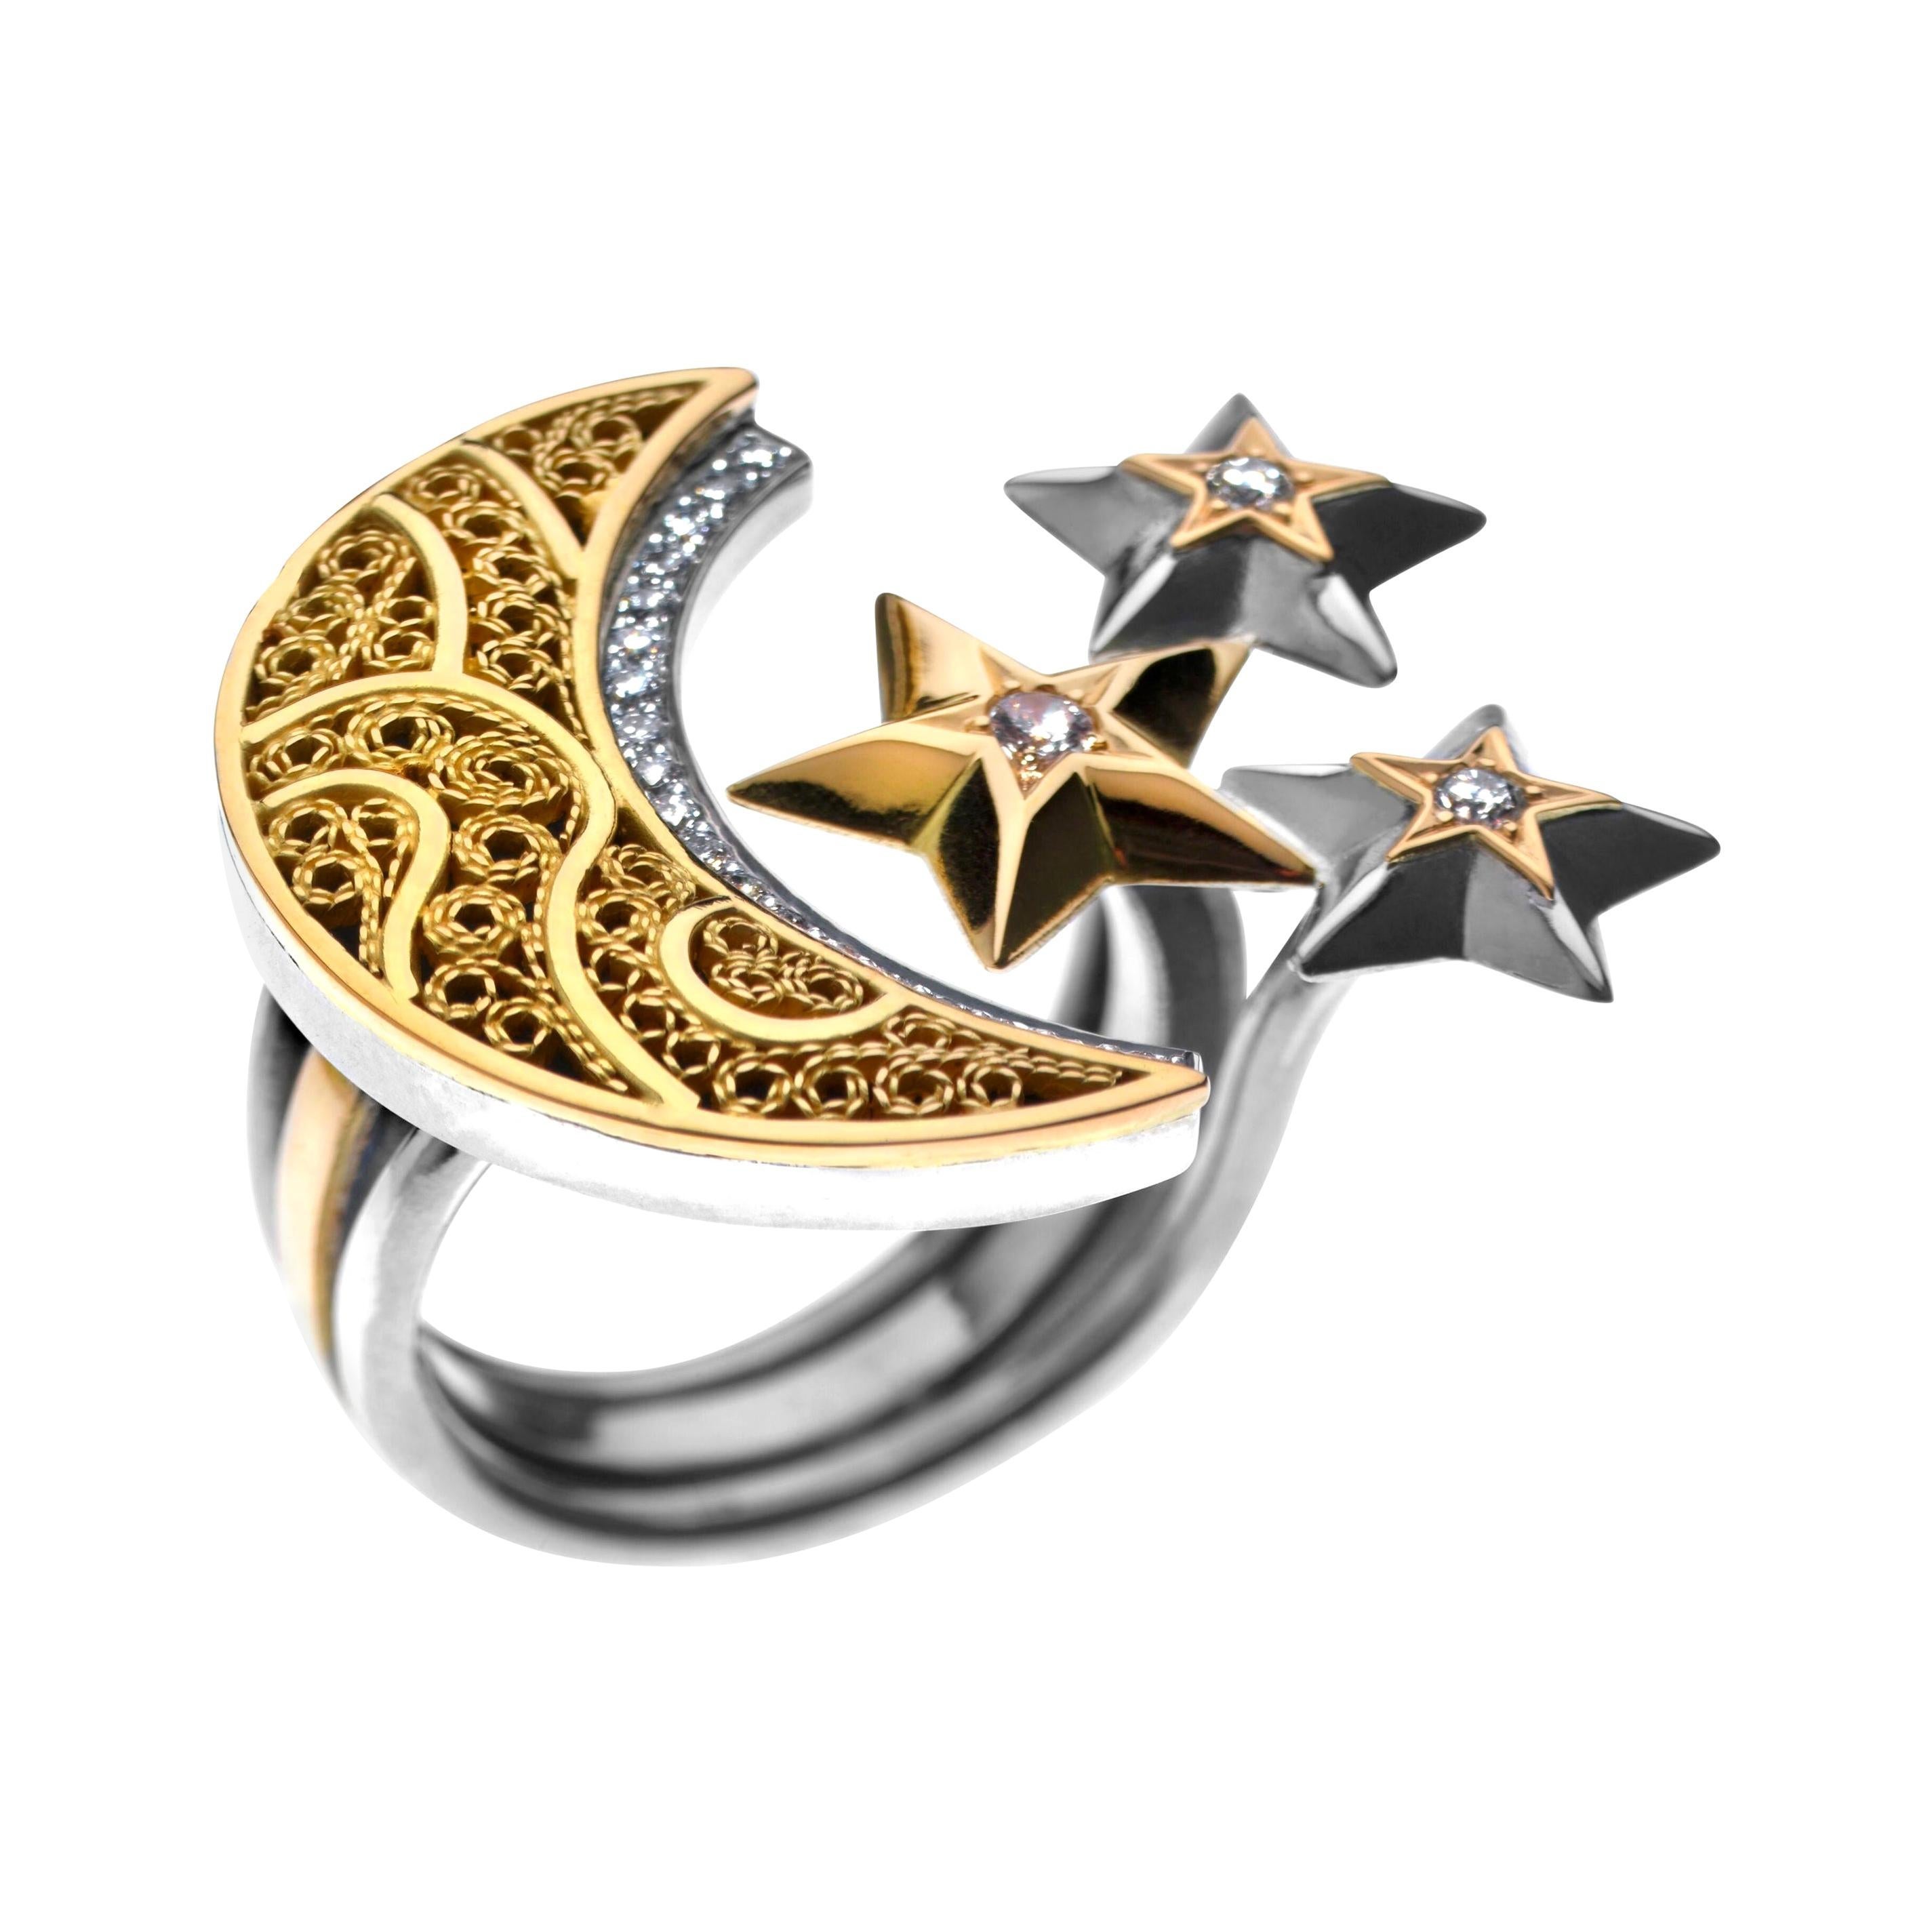 For Sale:  18 Karat Gold, Sterling Silver and Diamond Filigree Crescent Moon and Stars Ring